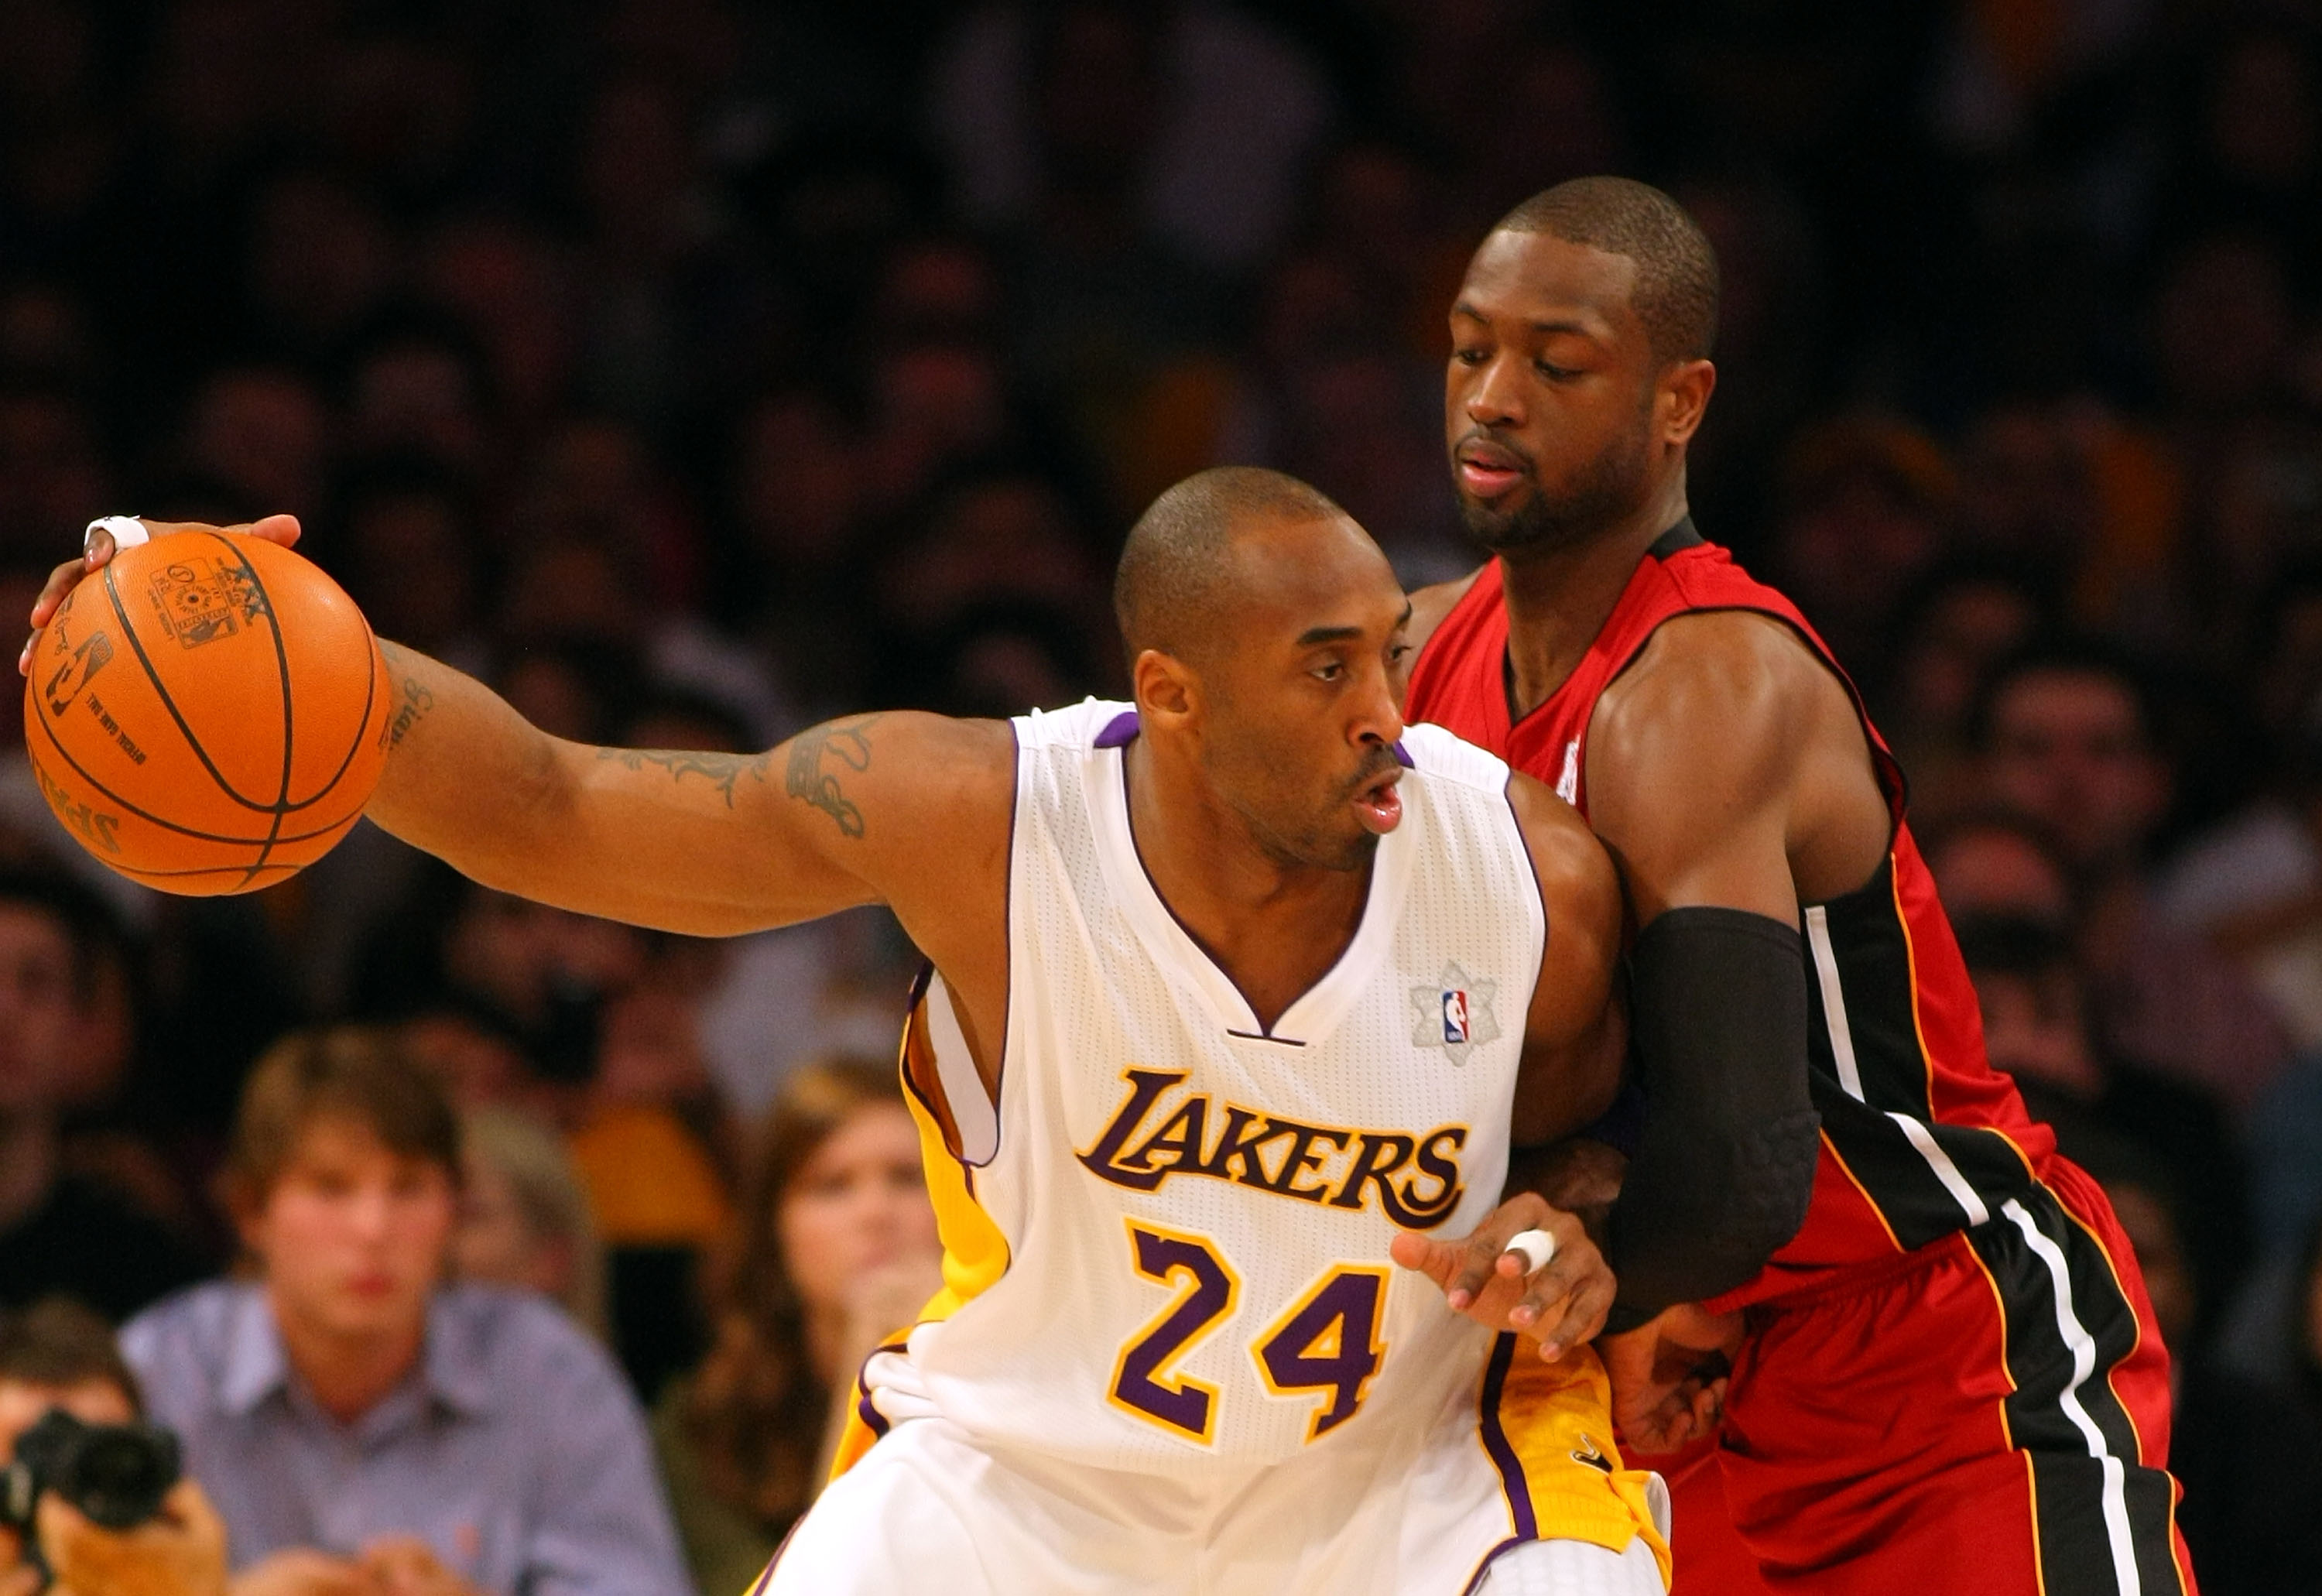 Amar'e Stoudemire On The Hardest Player To Guard Between Kobe And